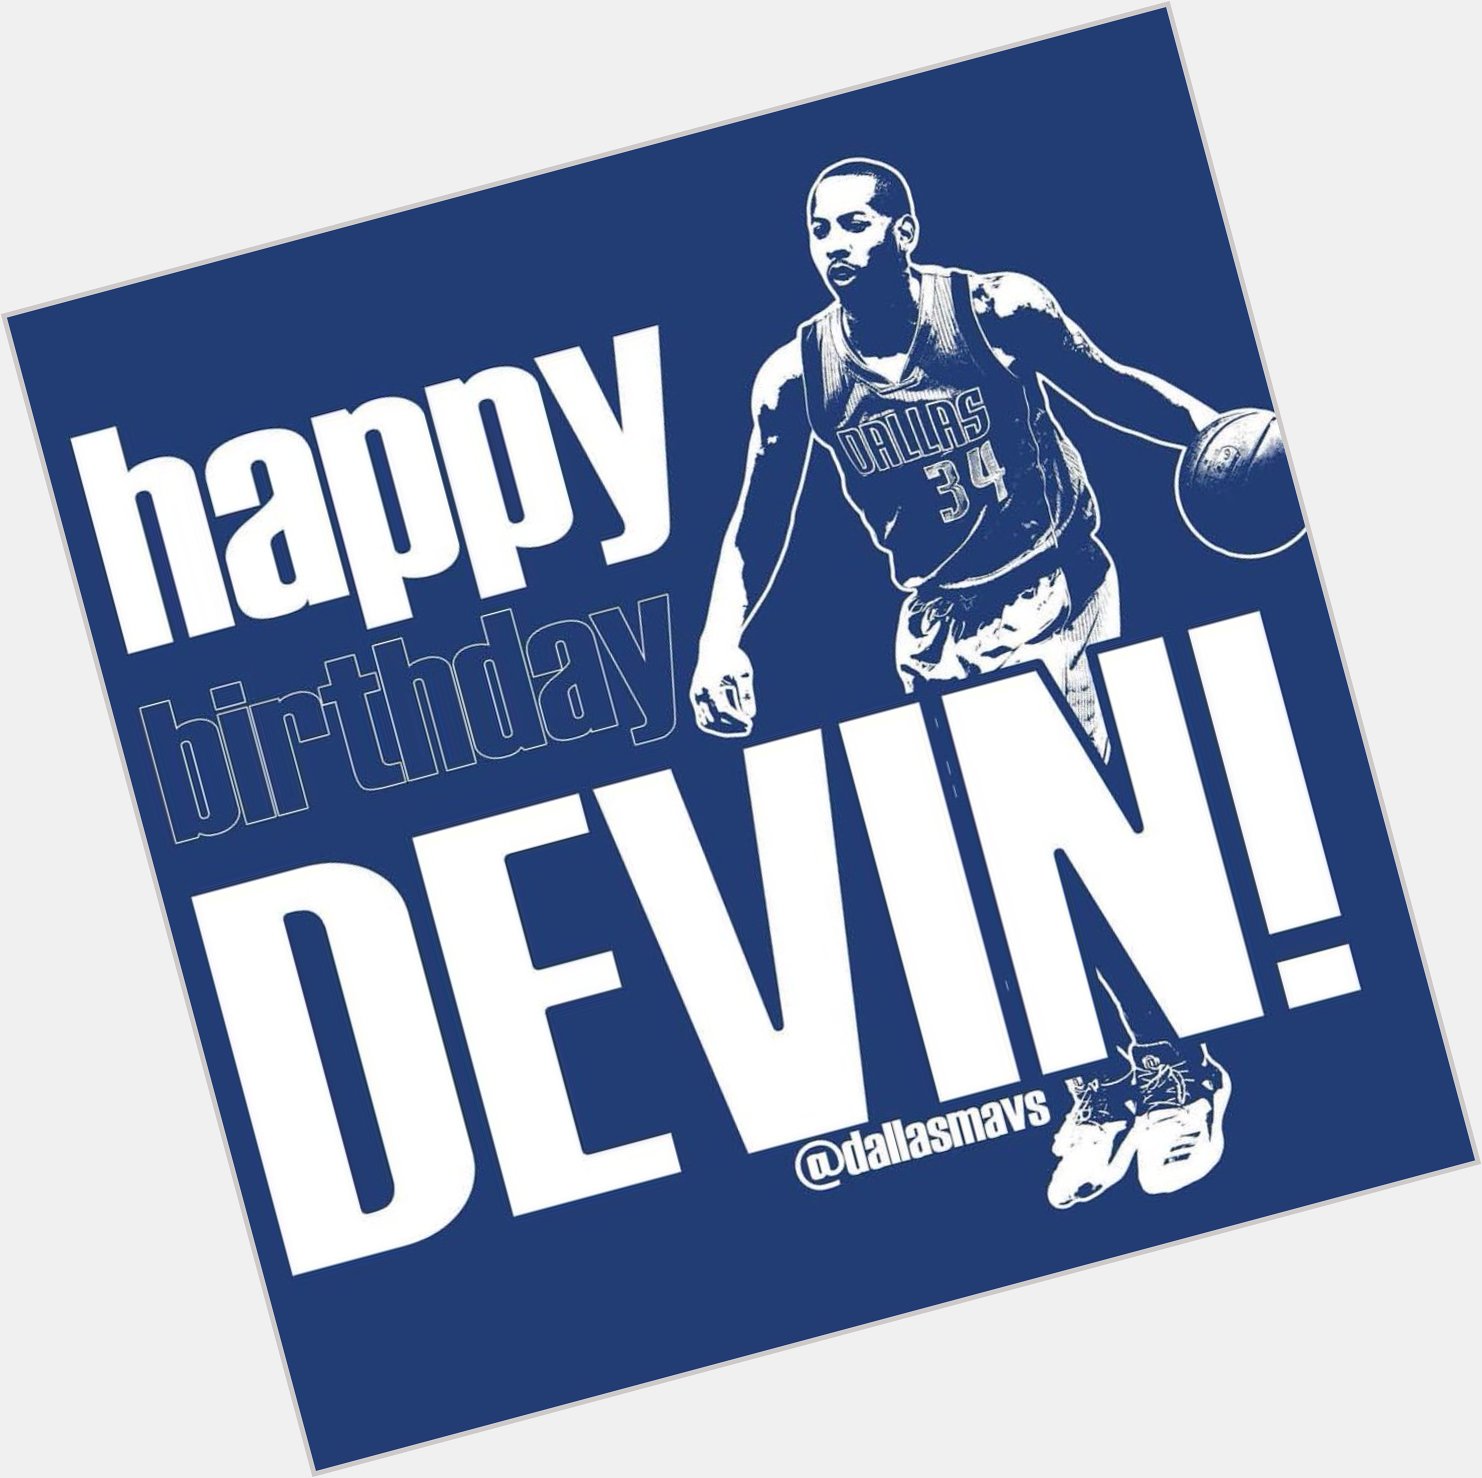 Happy birthday to Devin Harris!! We hope you have a great one & we get a win against the Heat for your birthday! 